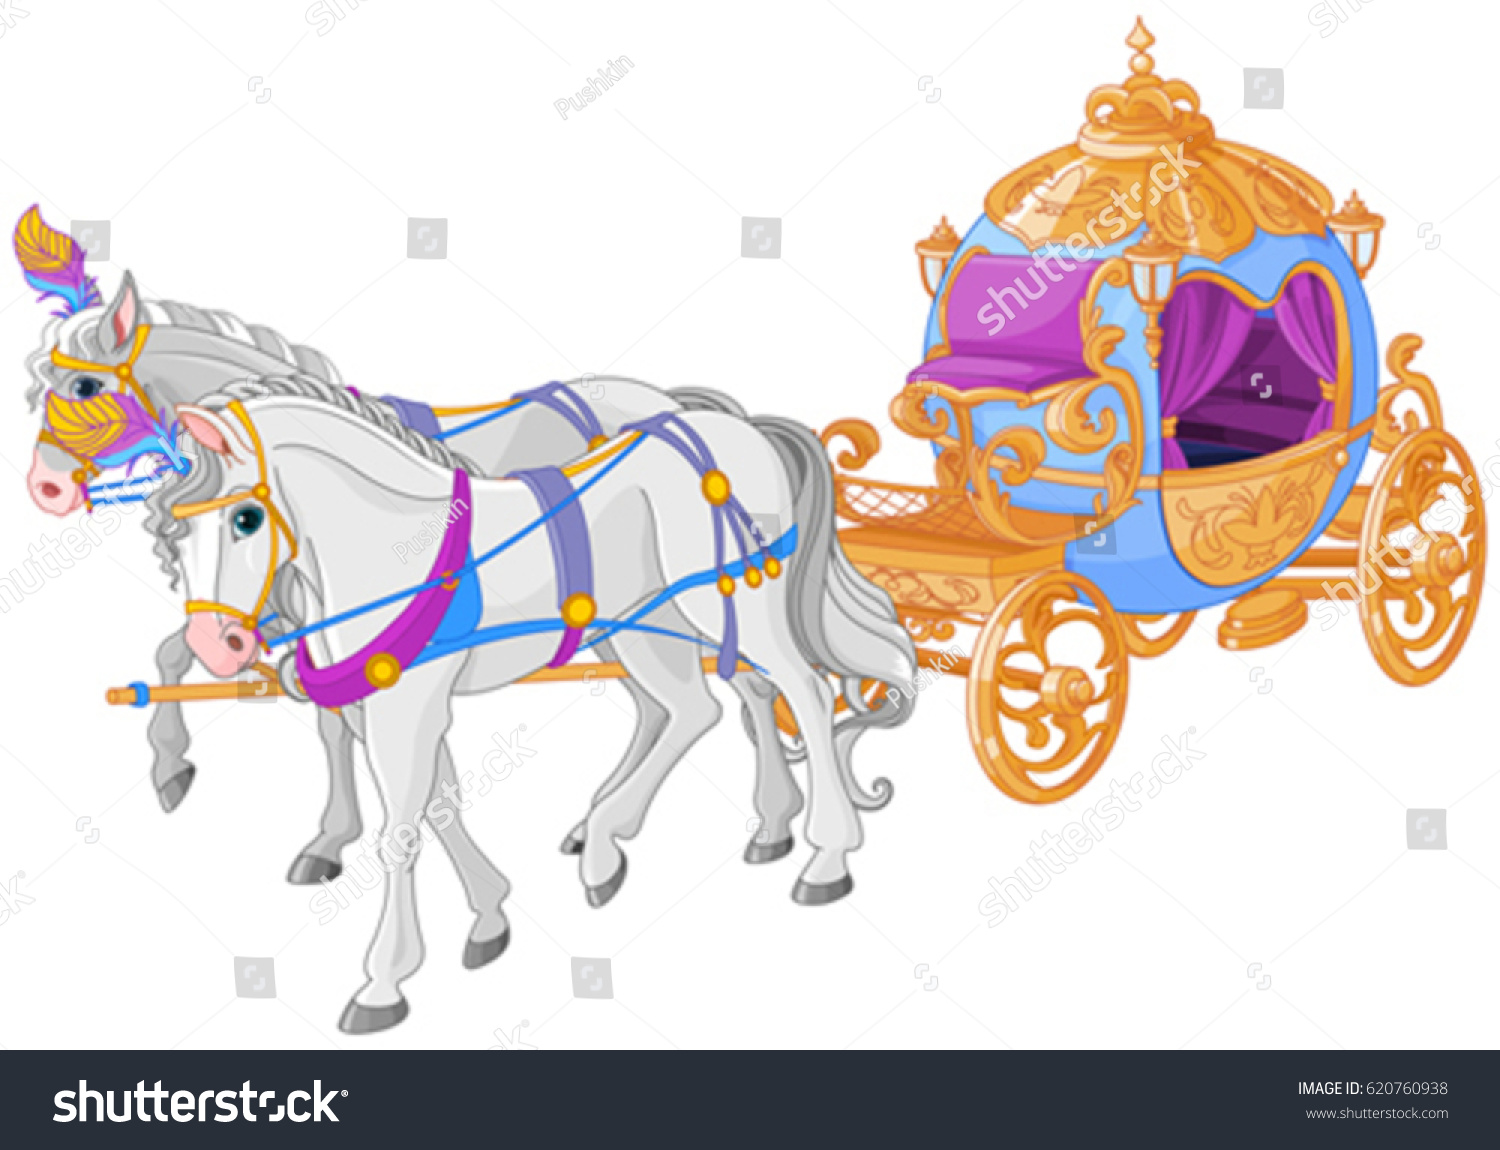 SVG of The golden carriage of Cinderella svg